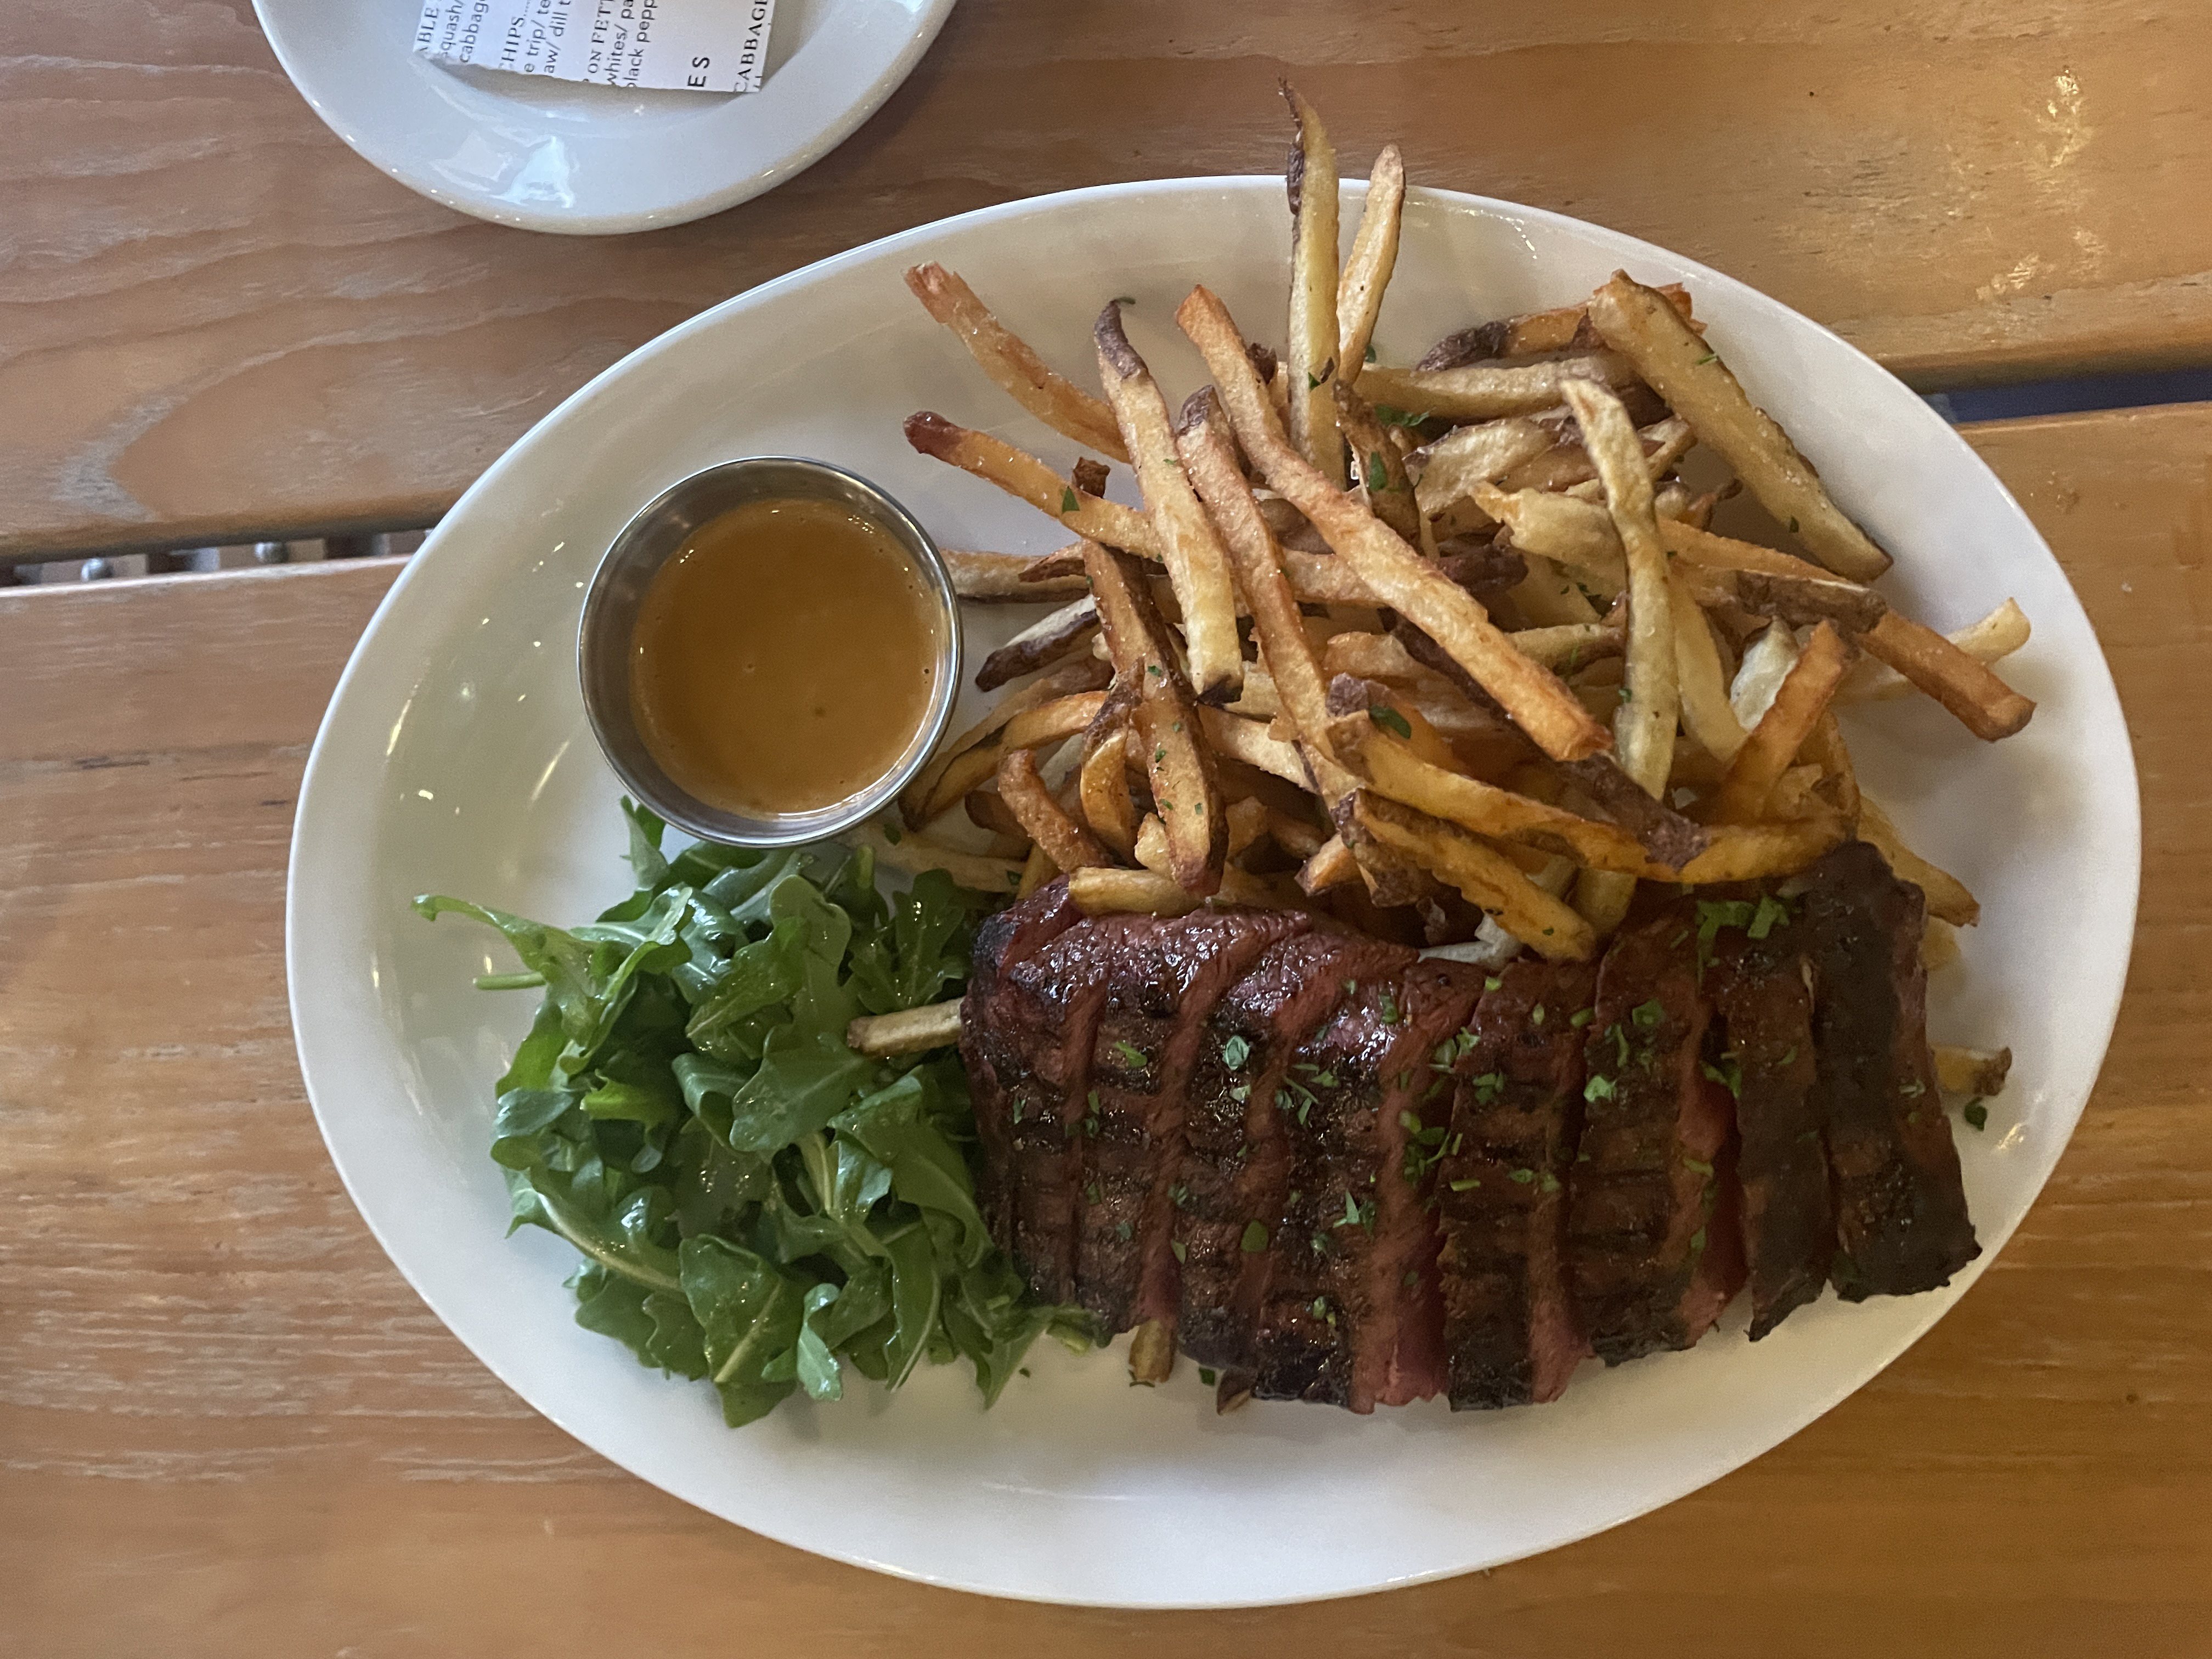 A white plate holds a sliced steak, french fries, an arugula salad, and dressing.